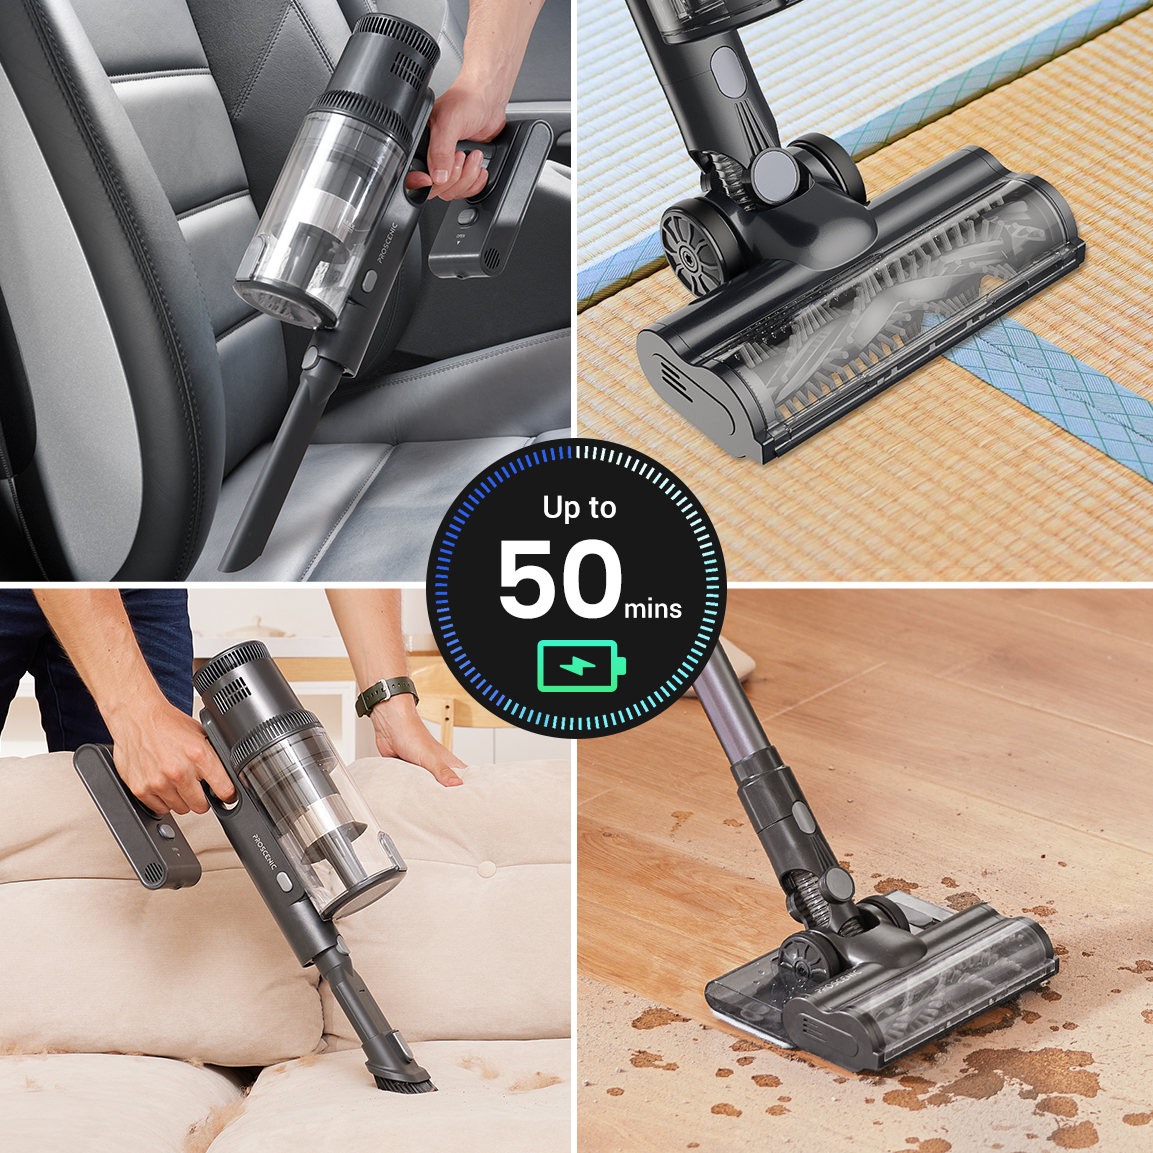 For Proscenic P11 P10 P12 P9 P8 i9 P10pro Cordless Vacuum Cleaner's Dry Wet  Integrated Electric Spray Mop Head With 2 Mops. - AliExpress